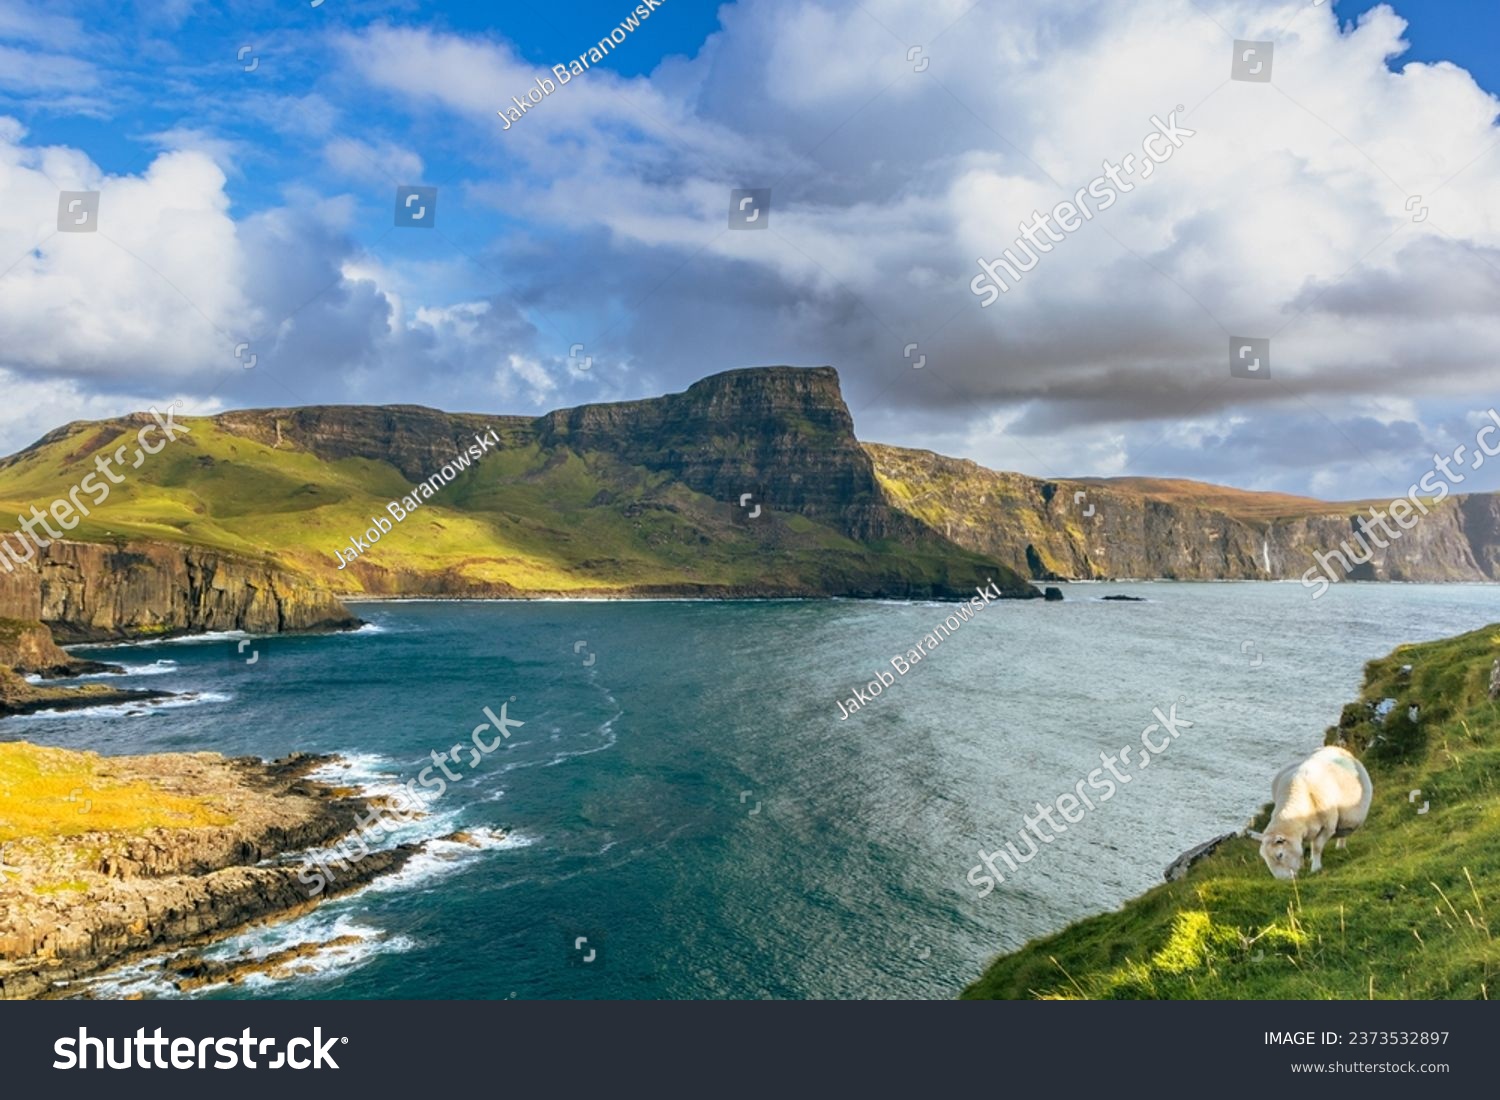 Isle of Skye is the largest island in the Inner Hebrides. It lies just off the west coast of mainland Scotland in the Atlantic Ocean.
Beautiful solitude in a quiet atmosphere without people. #2373532897